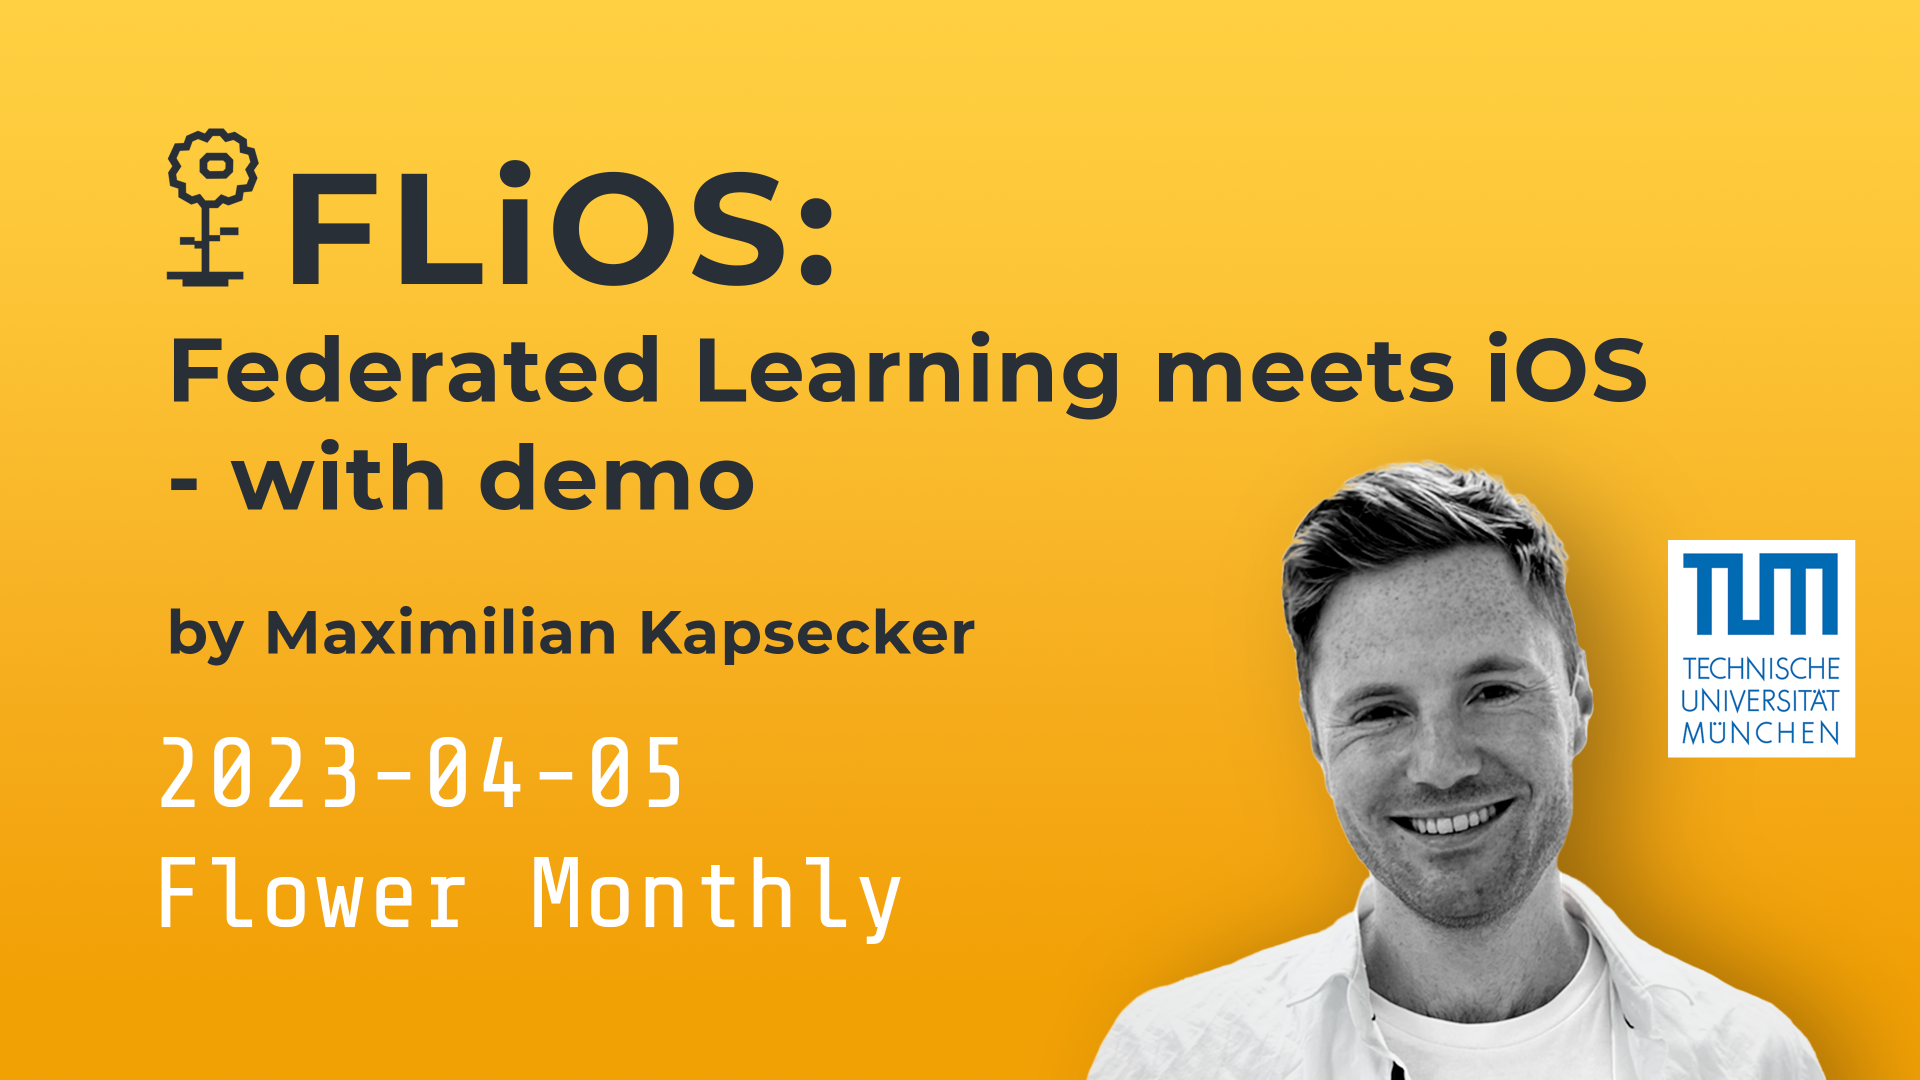 FLiOS – Federated Learning meets iOS